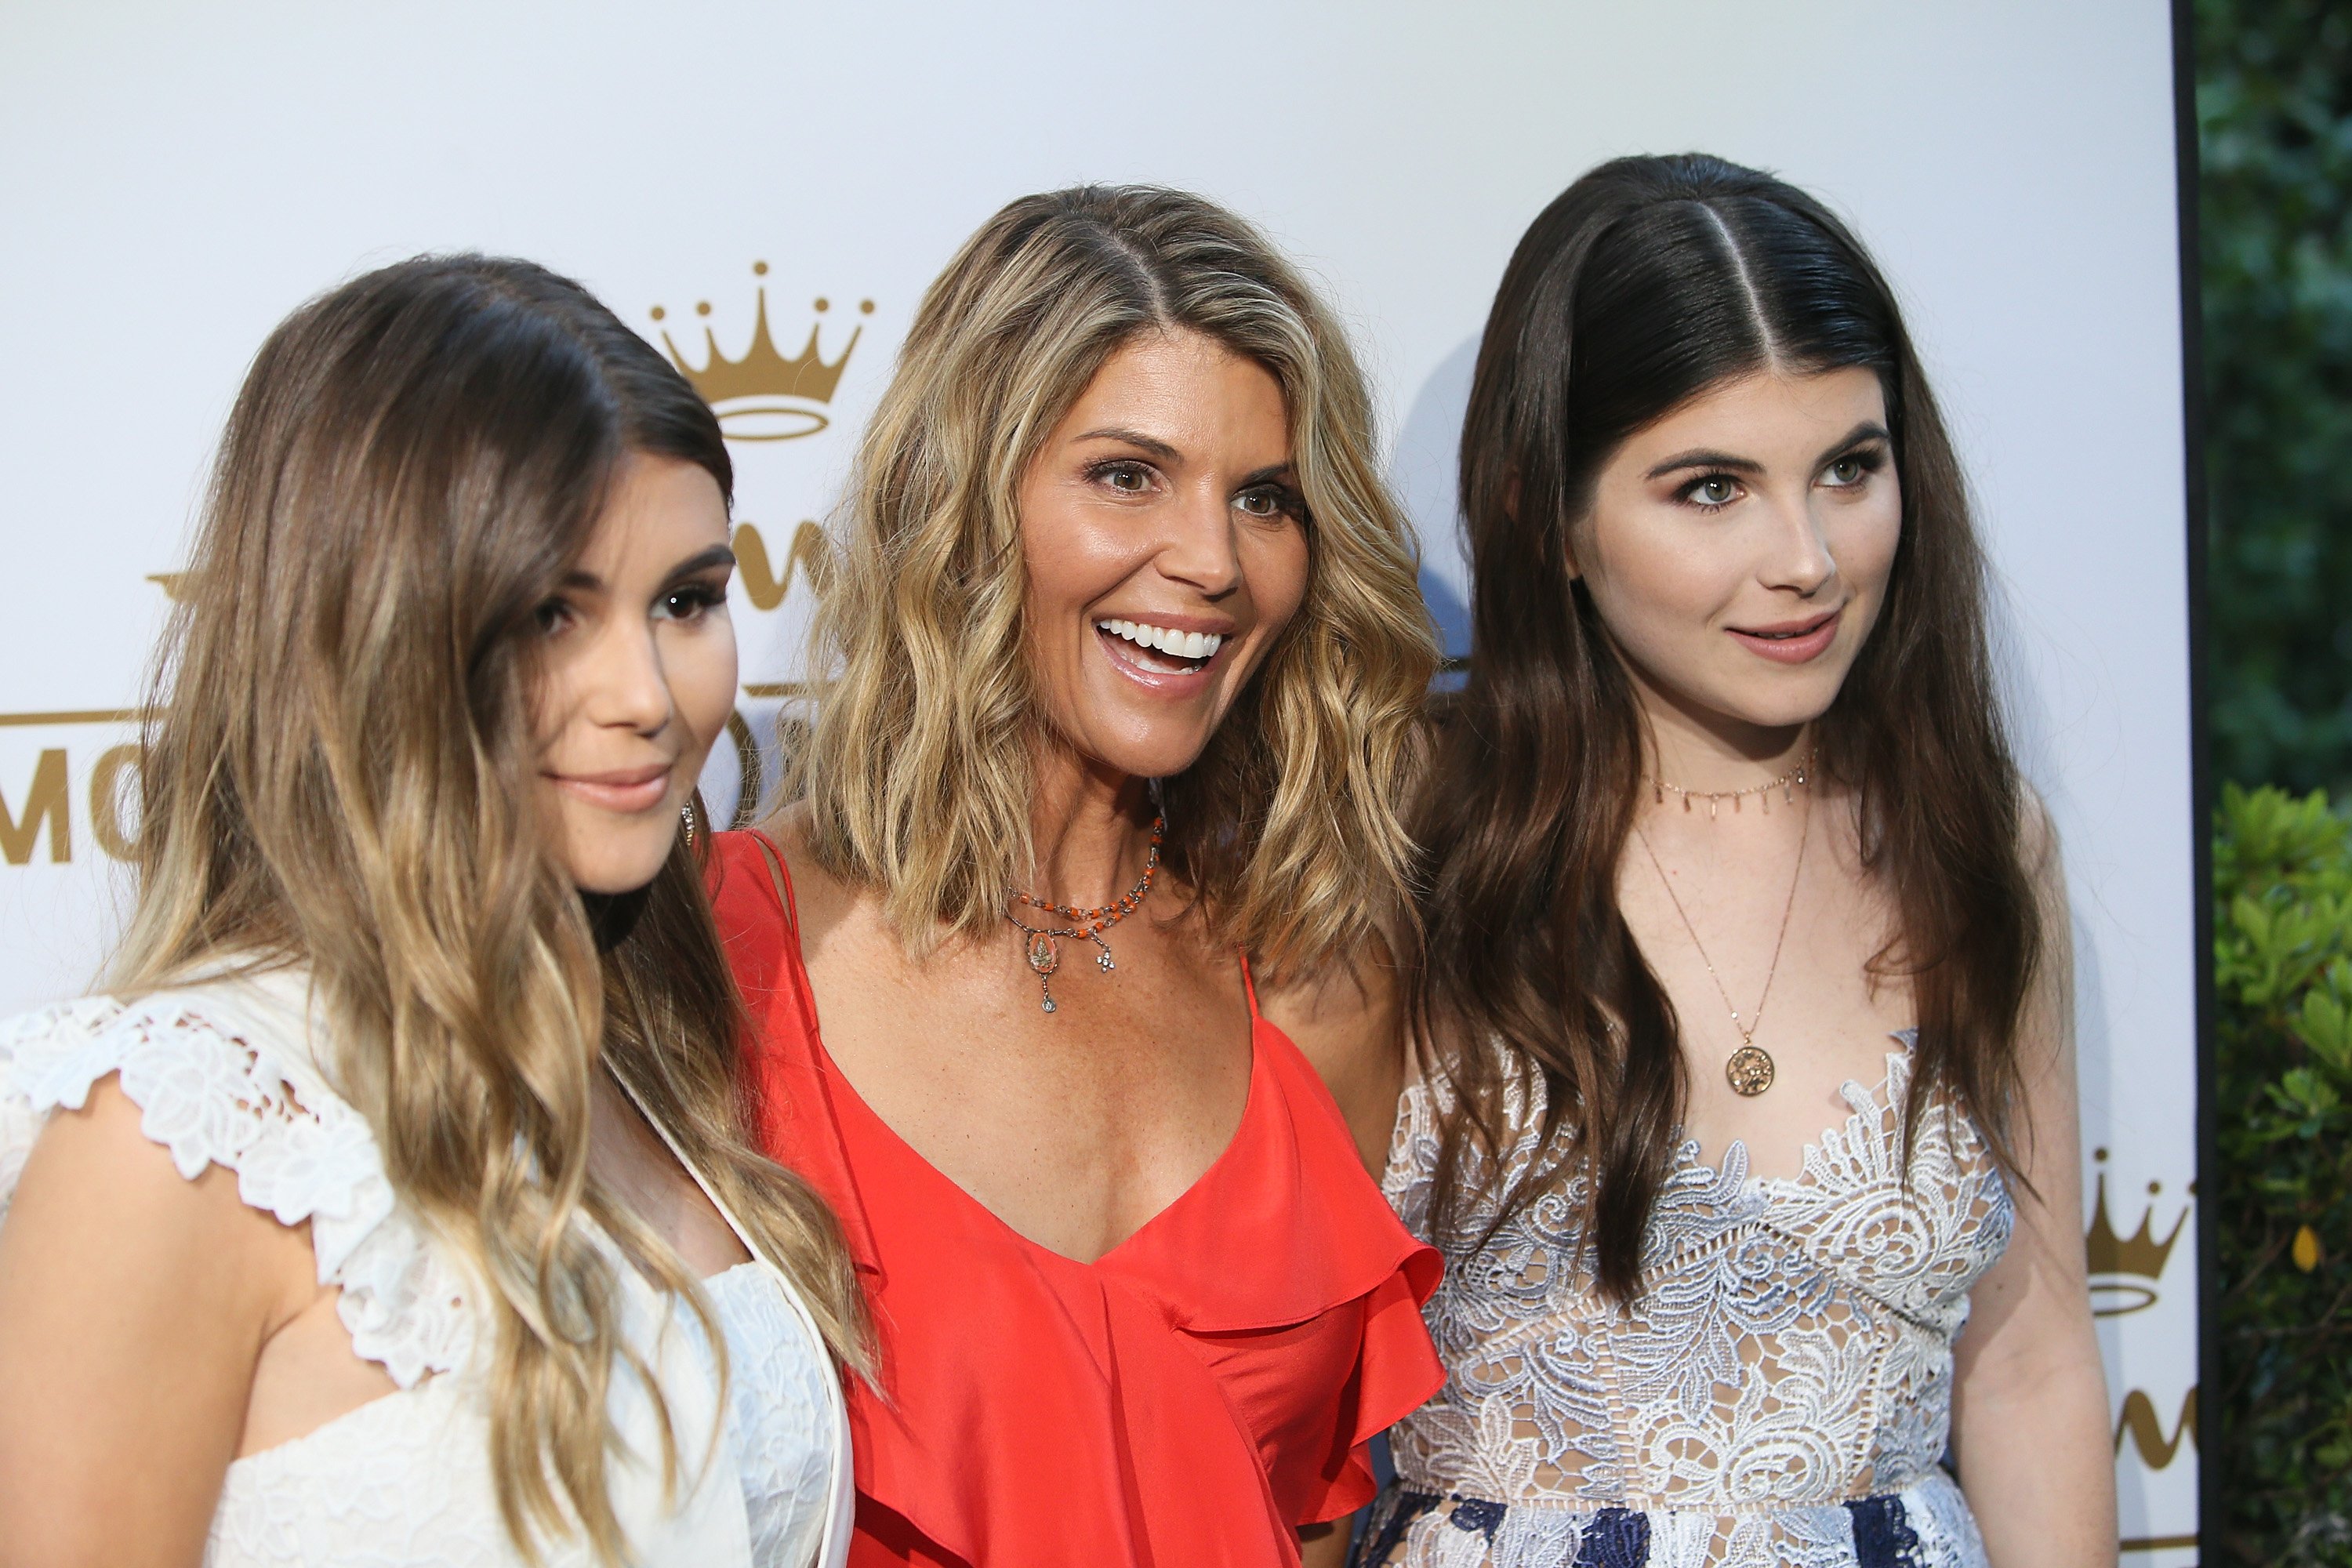 Lori Loughlin, Olivia Jade and Isabella Rose Giannulli | Photo: Getty Images